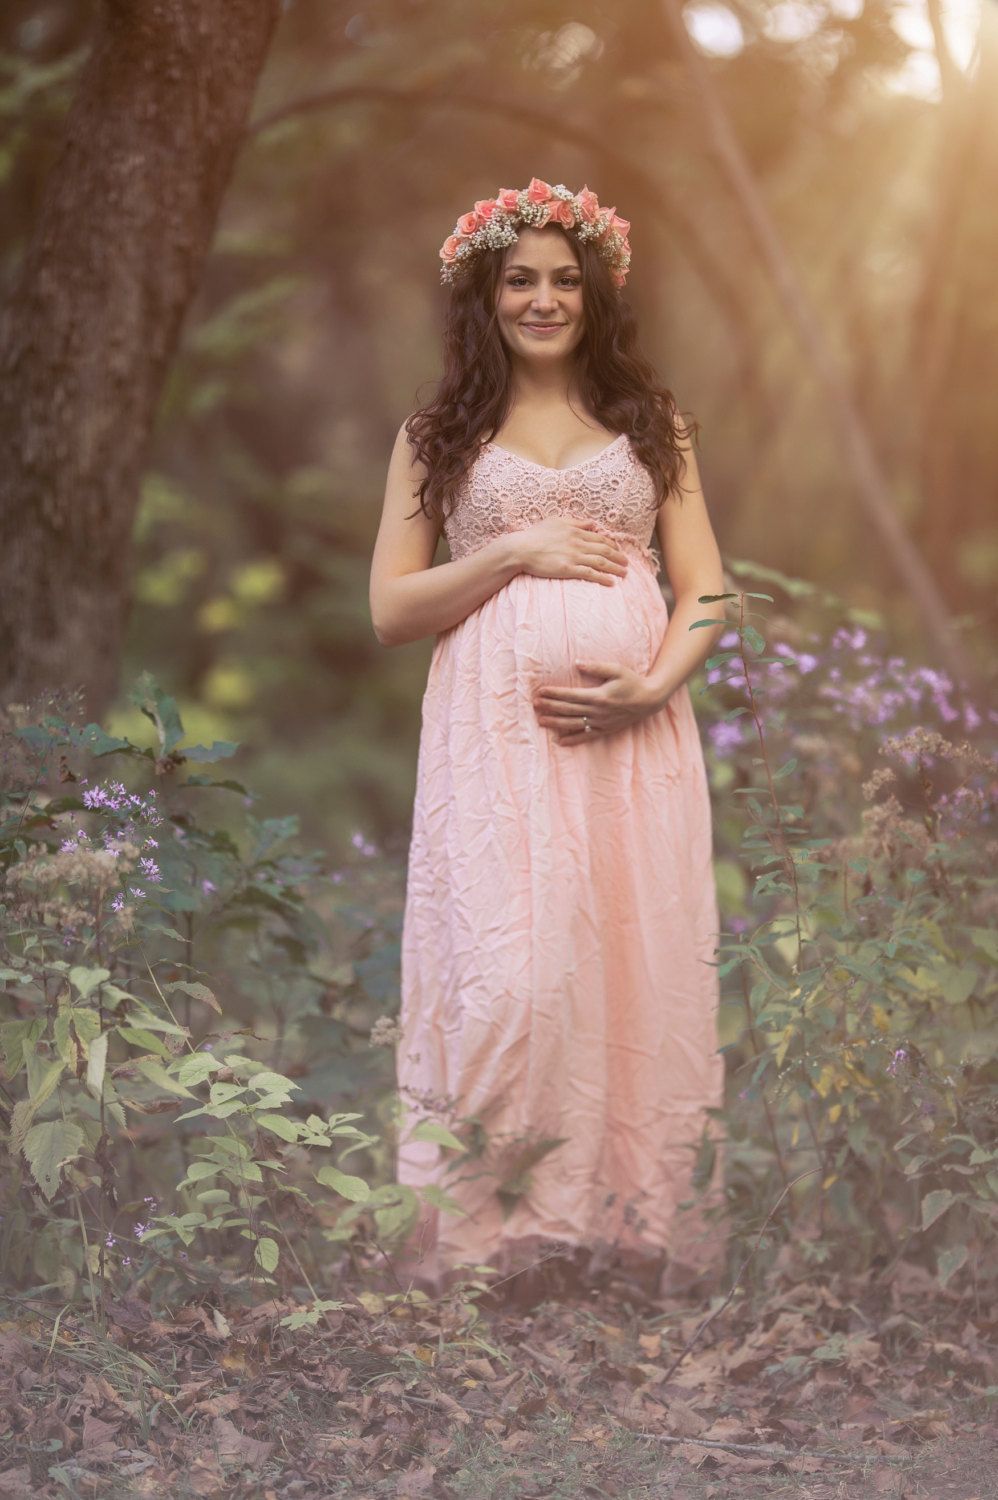 Full Size of Baby Shower:pink Maternity Dress Maternity Gowns For Photography Maternity Dresses For Baby Shower Mom And Dad Baby Shower Outfits Baby Shower Dresses For Fall Plus Size Maternity Clothes Baby Shower Attire For Mom Maternity Gowns For Photography